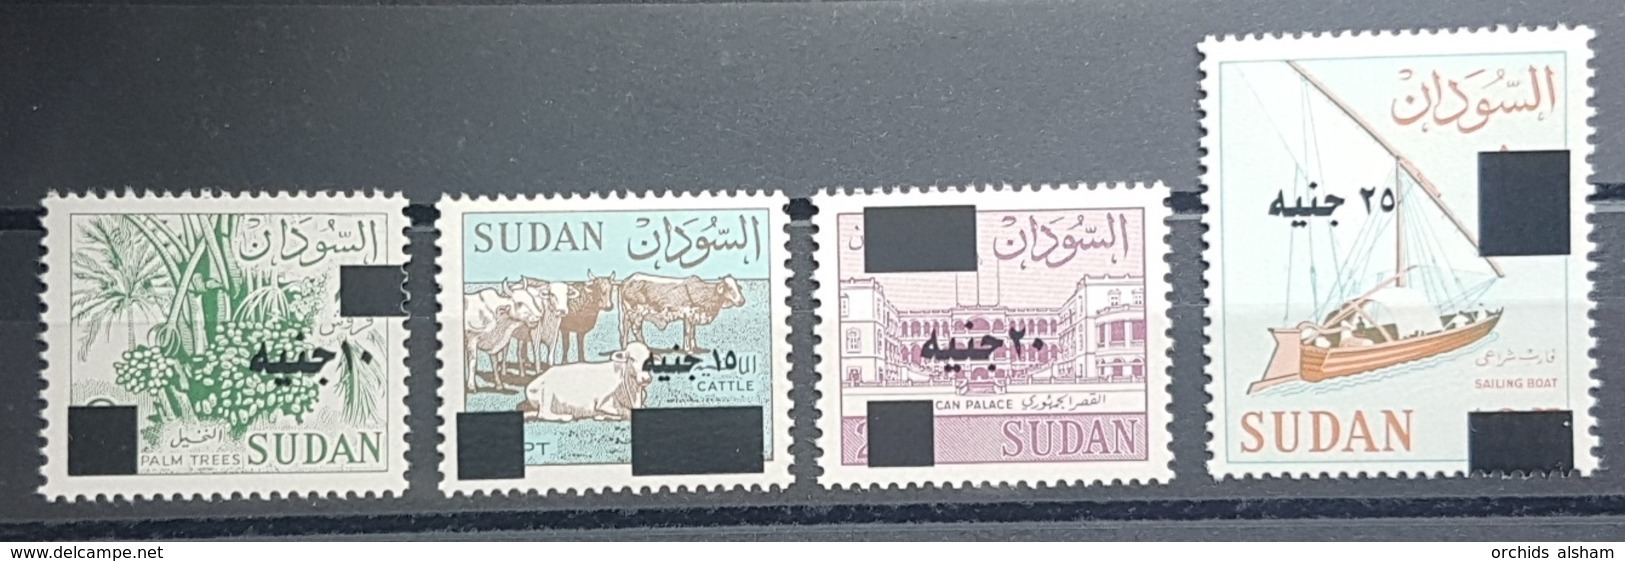 HXSU1 - Sudan 2018 Complete Year Issues MNH - Stamps Surcharged New Values - Soudan (1954-...)